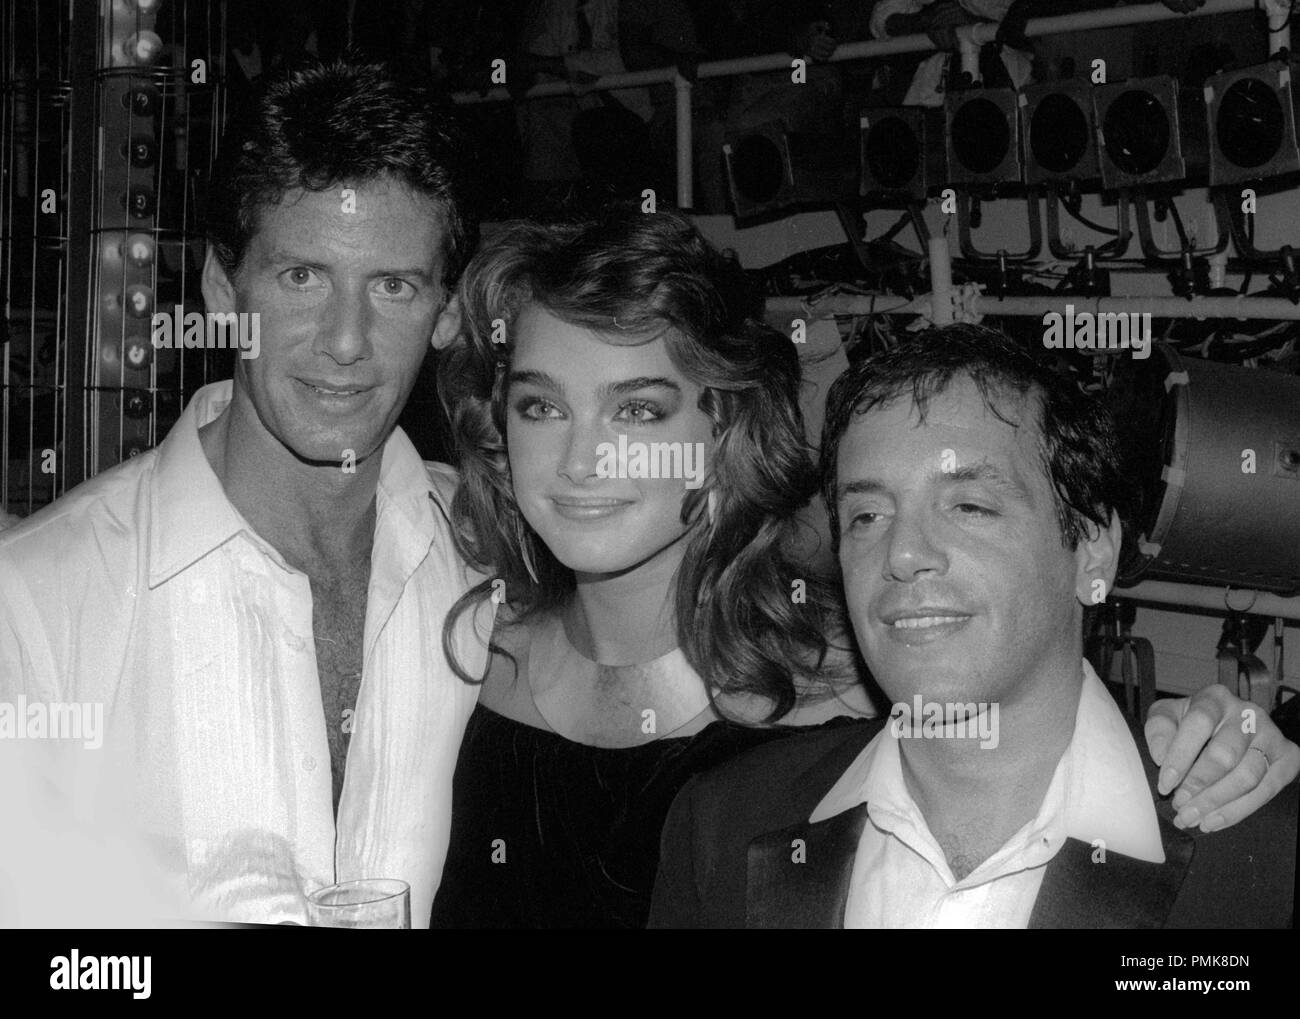 Calvin Klein, Brooke Shields and Steve Rubell at Studio 54 1981 Photo ...